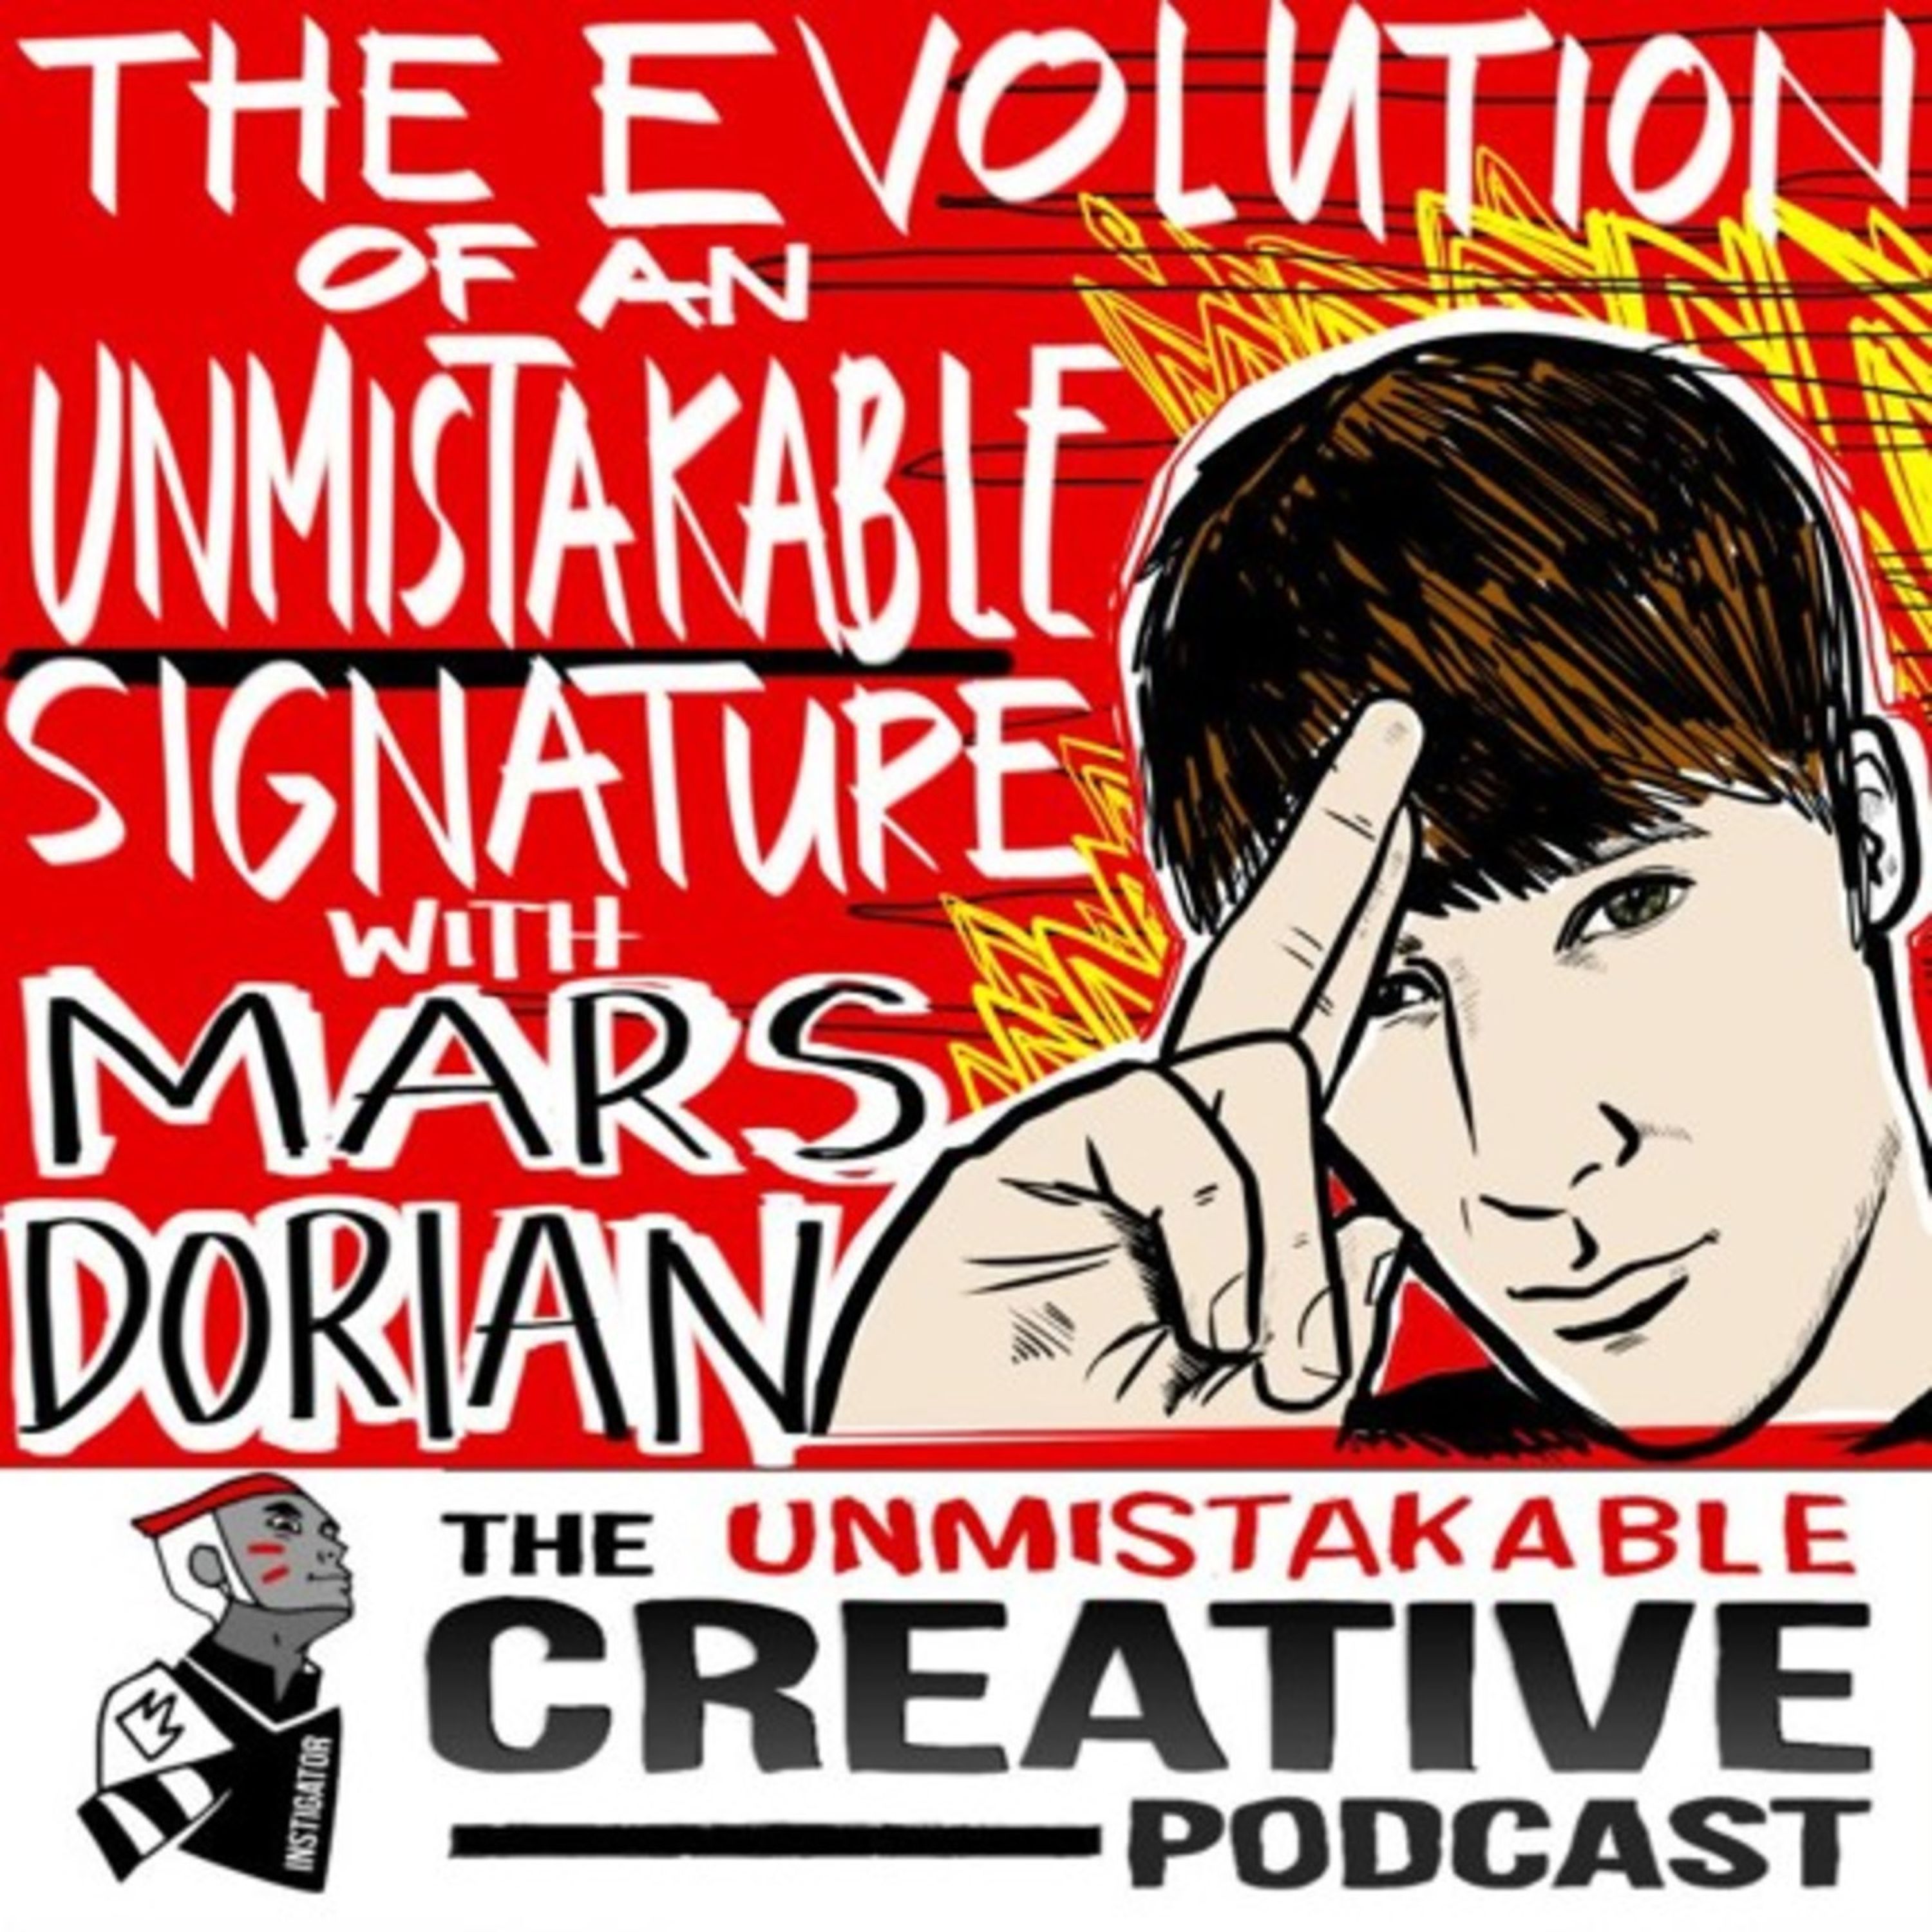 Best of: The Evolution of an Unmistakable Signature with Mars Dorian